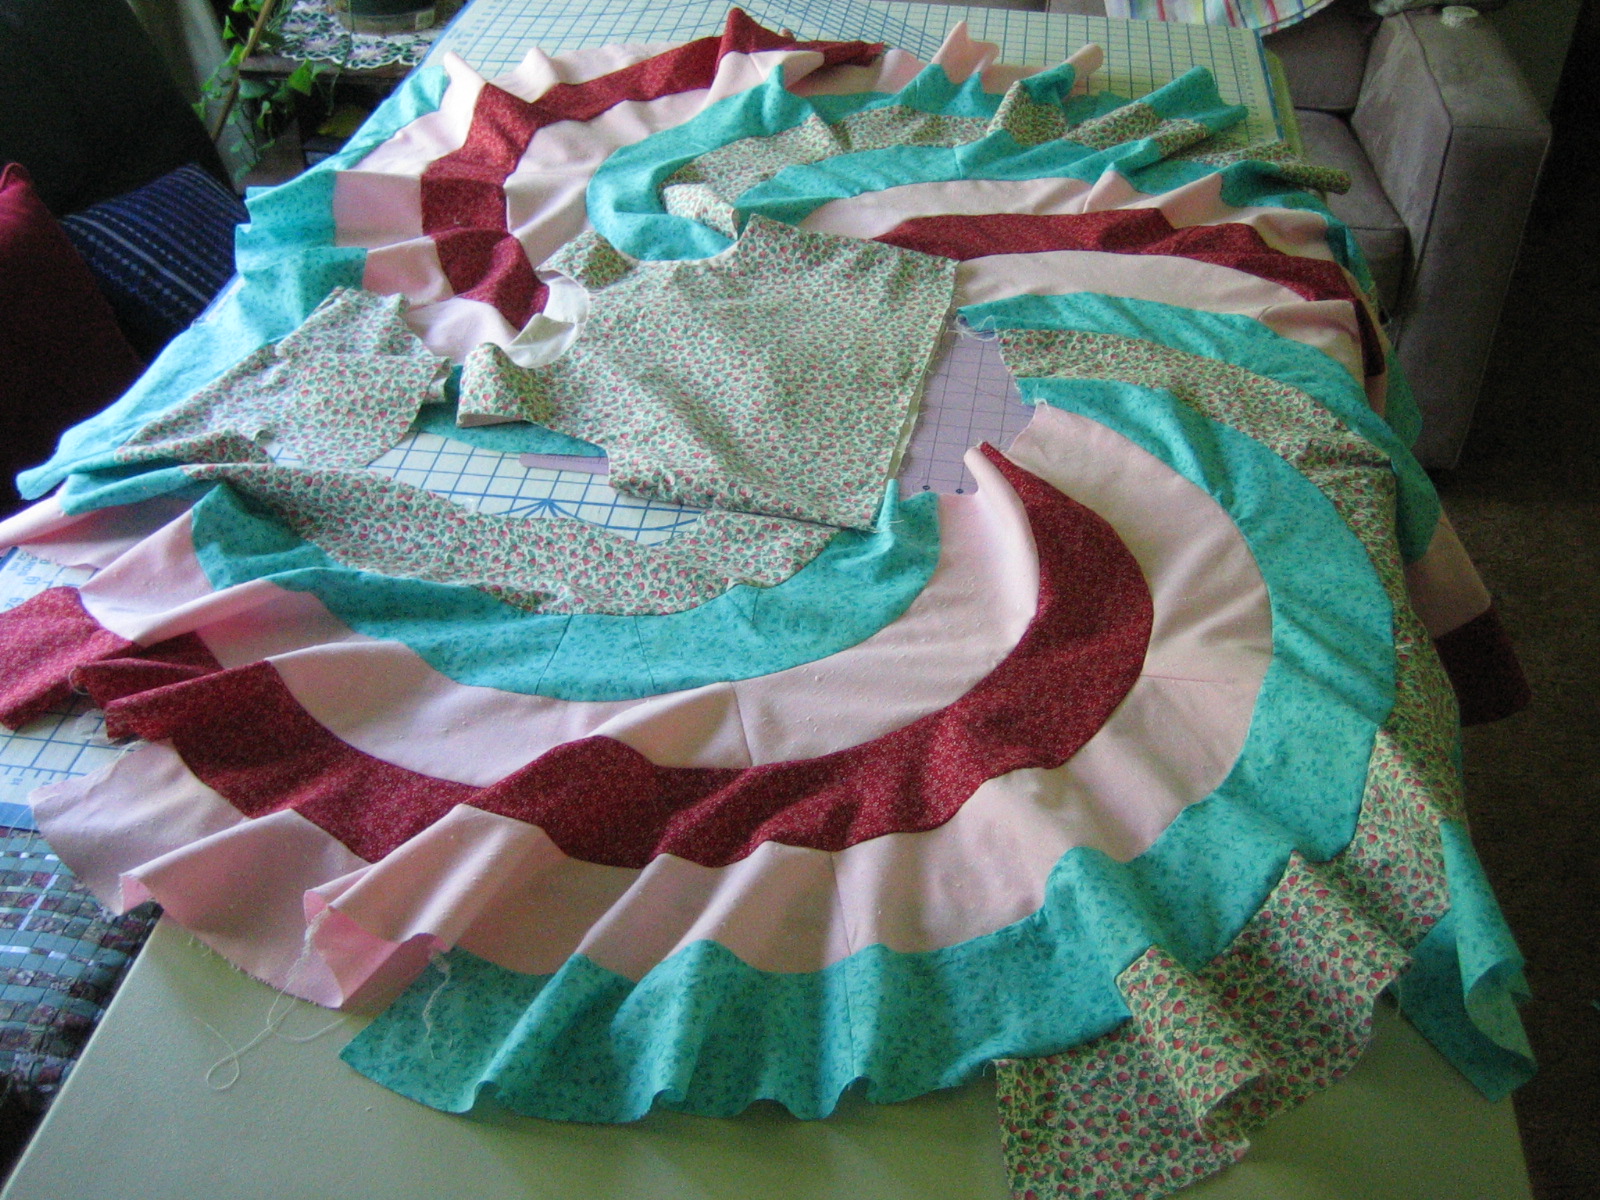 Spiral swirl skirt laid out before sewing together